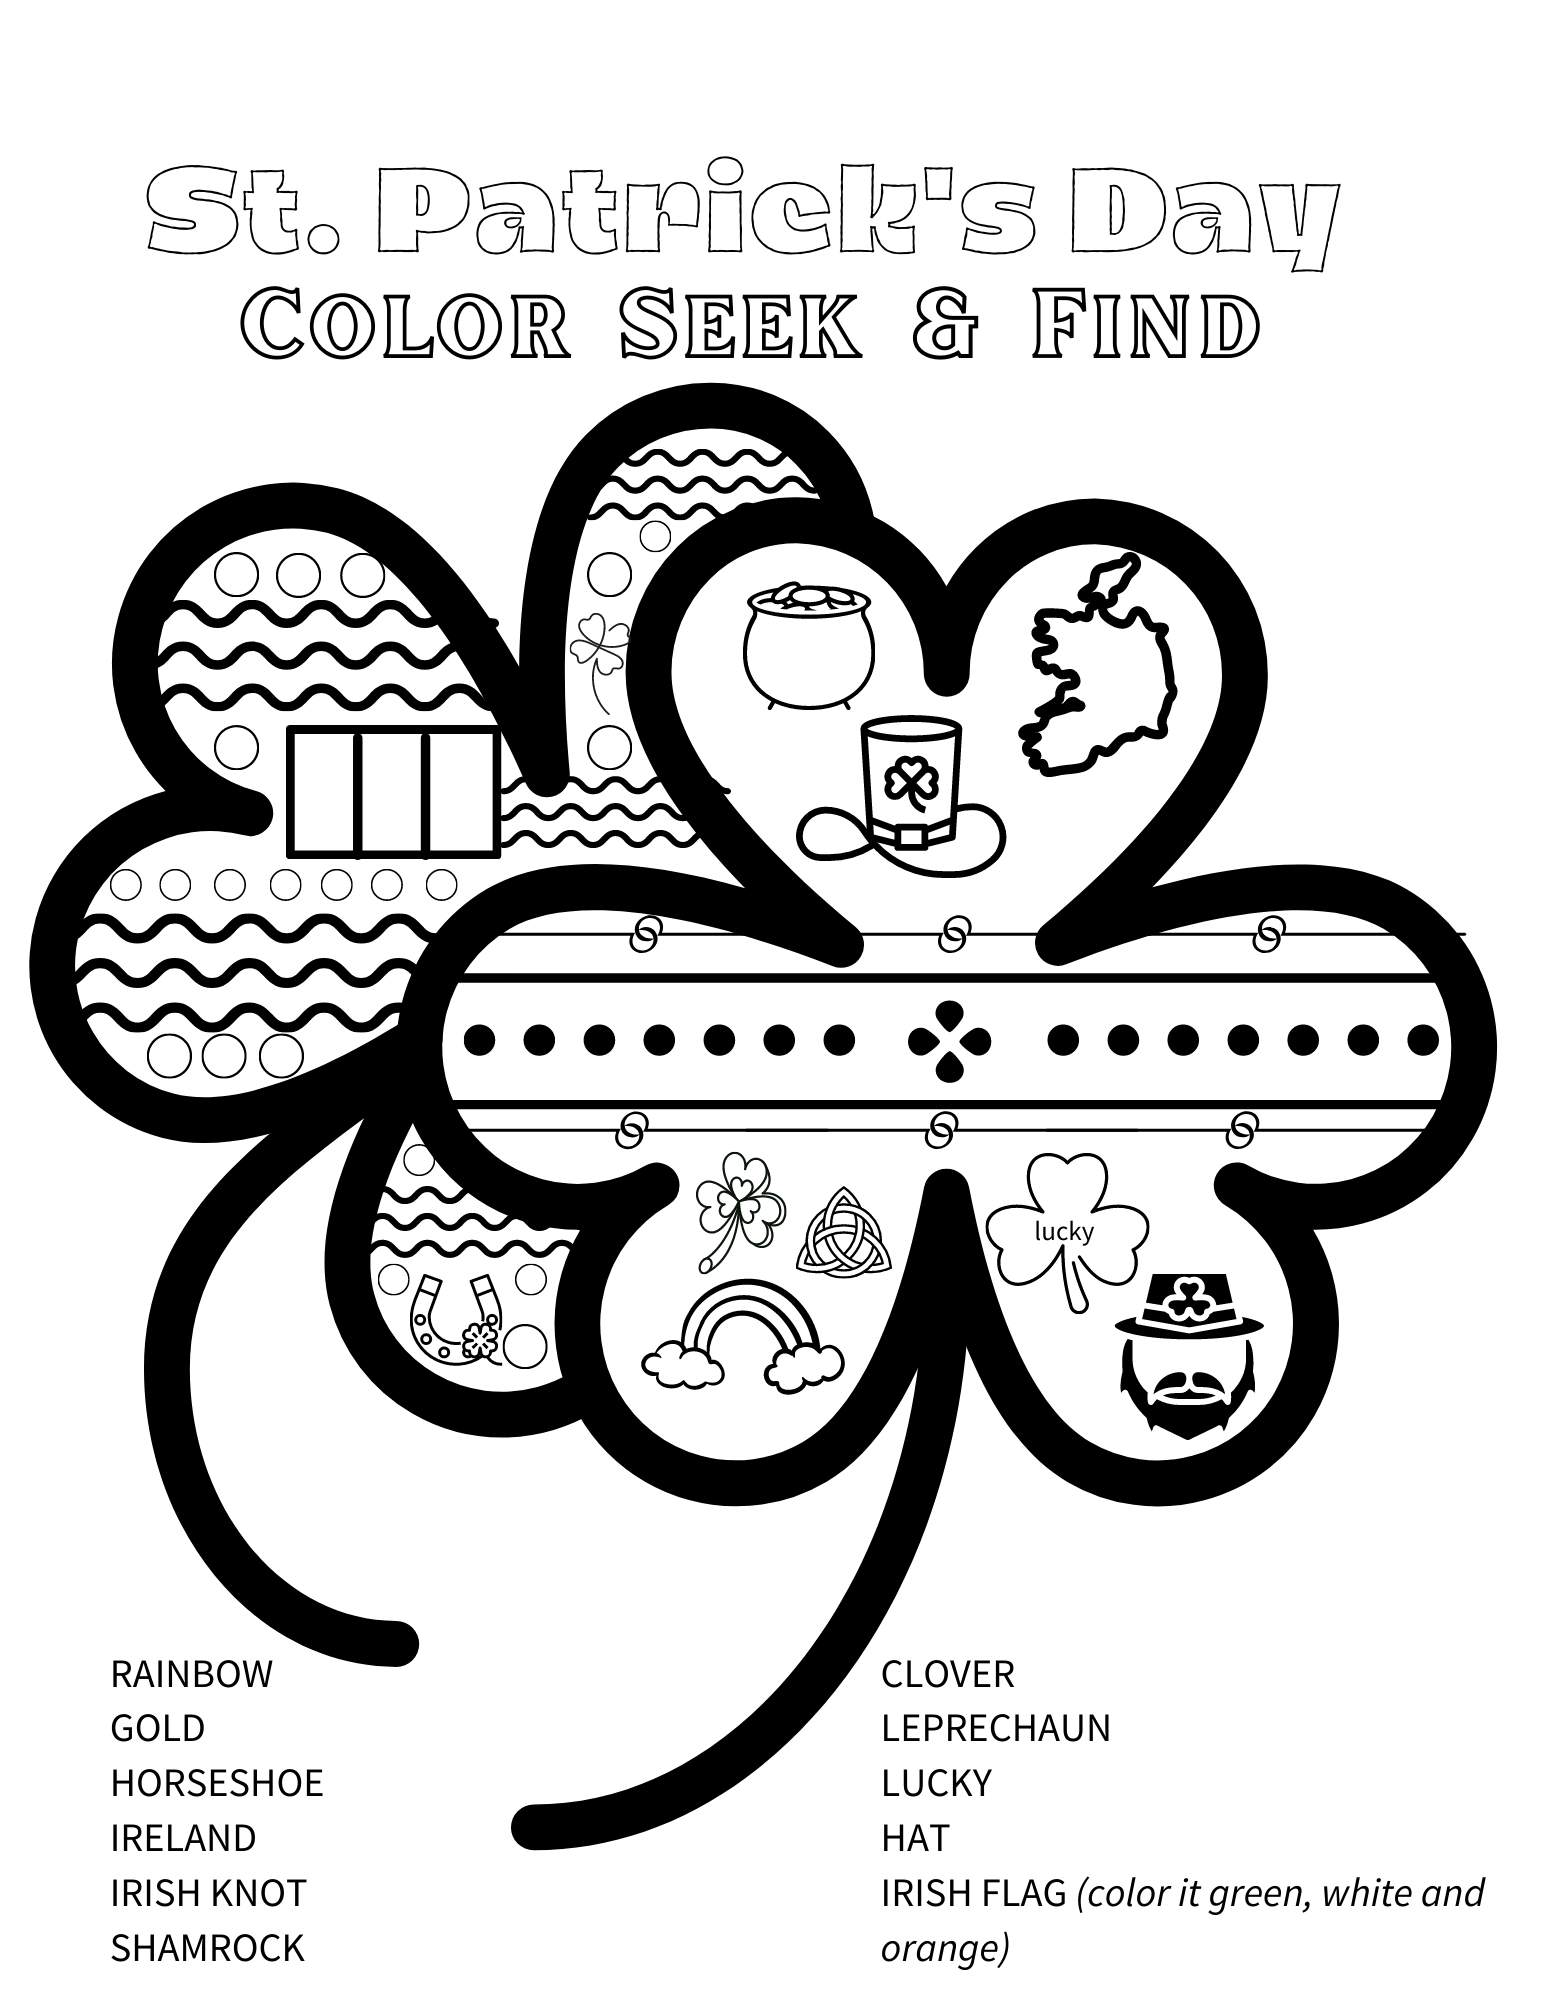 Free printable color seek and find for st patricks day